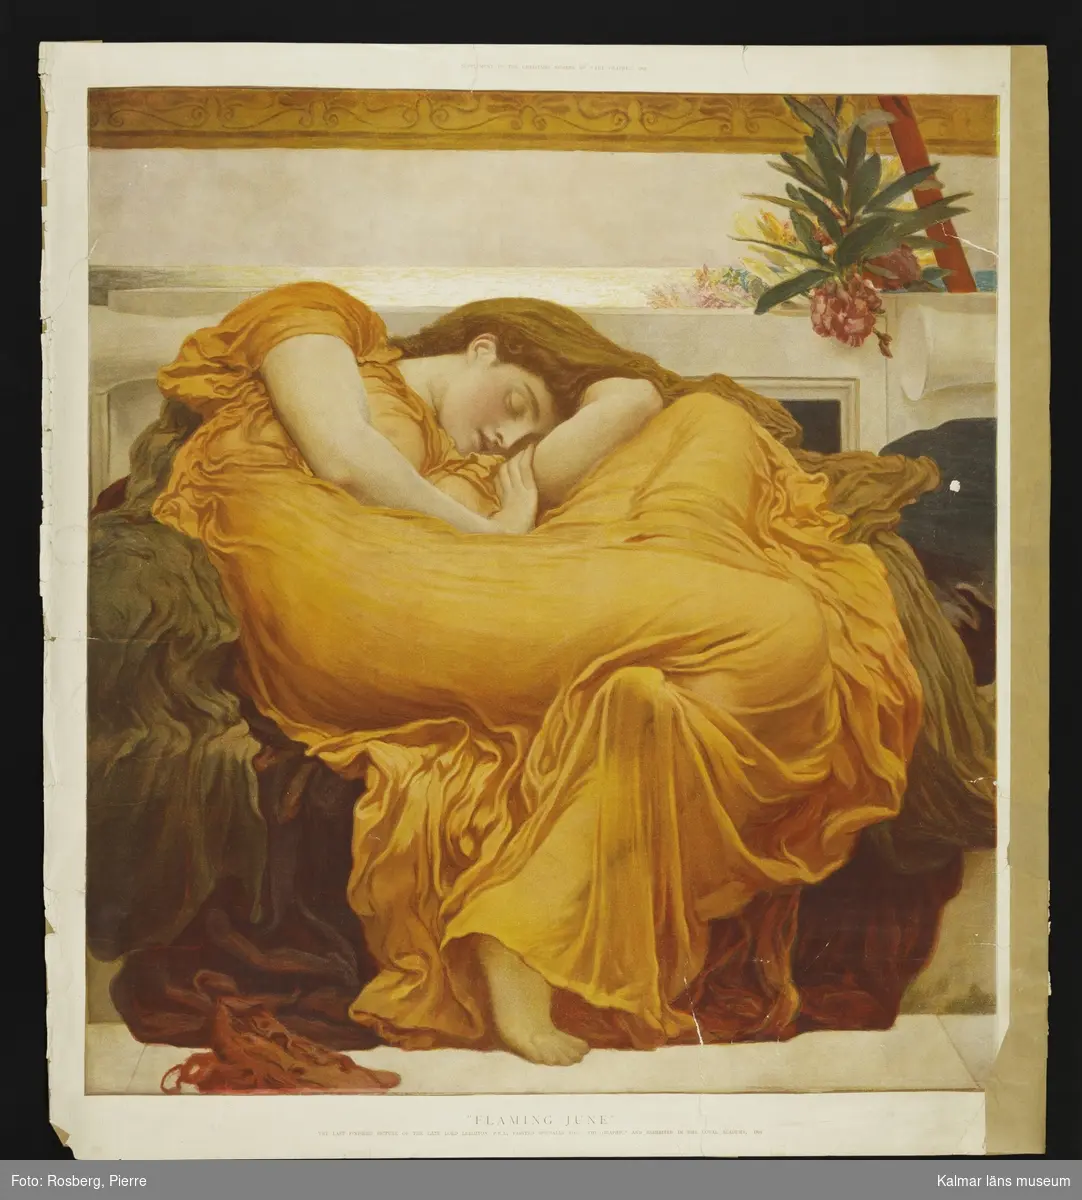 KLM 23970:57. Färgplansch. Text: "Flaming June" The last finished picture of the late lord Leighton, P.R.A. Painted specially for "The Graphic" and exhibited in the Loyal Academy, 1895. Supplement to the Christmas number of the Graphic 1896.